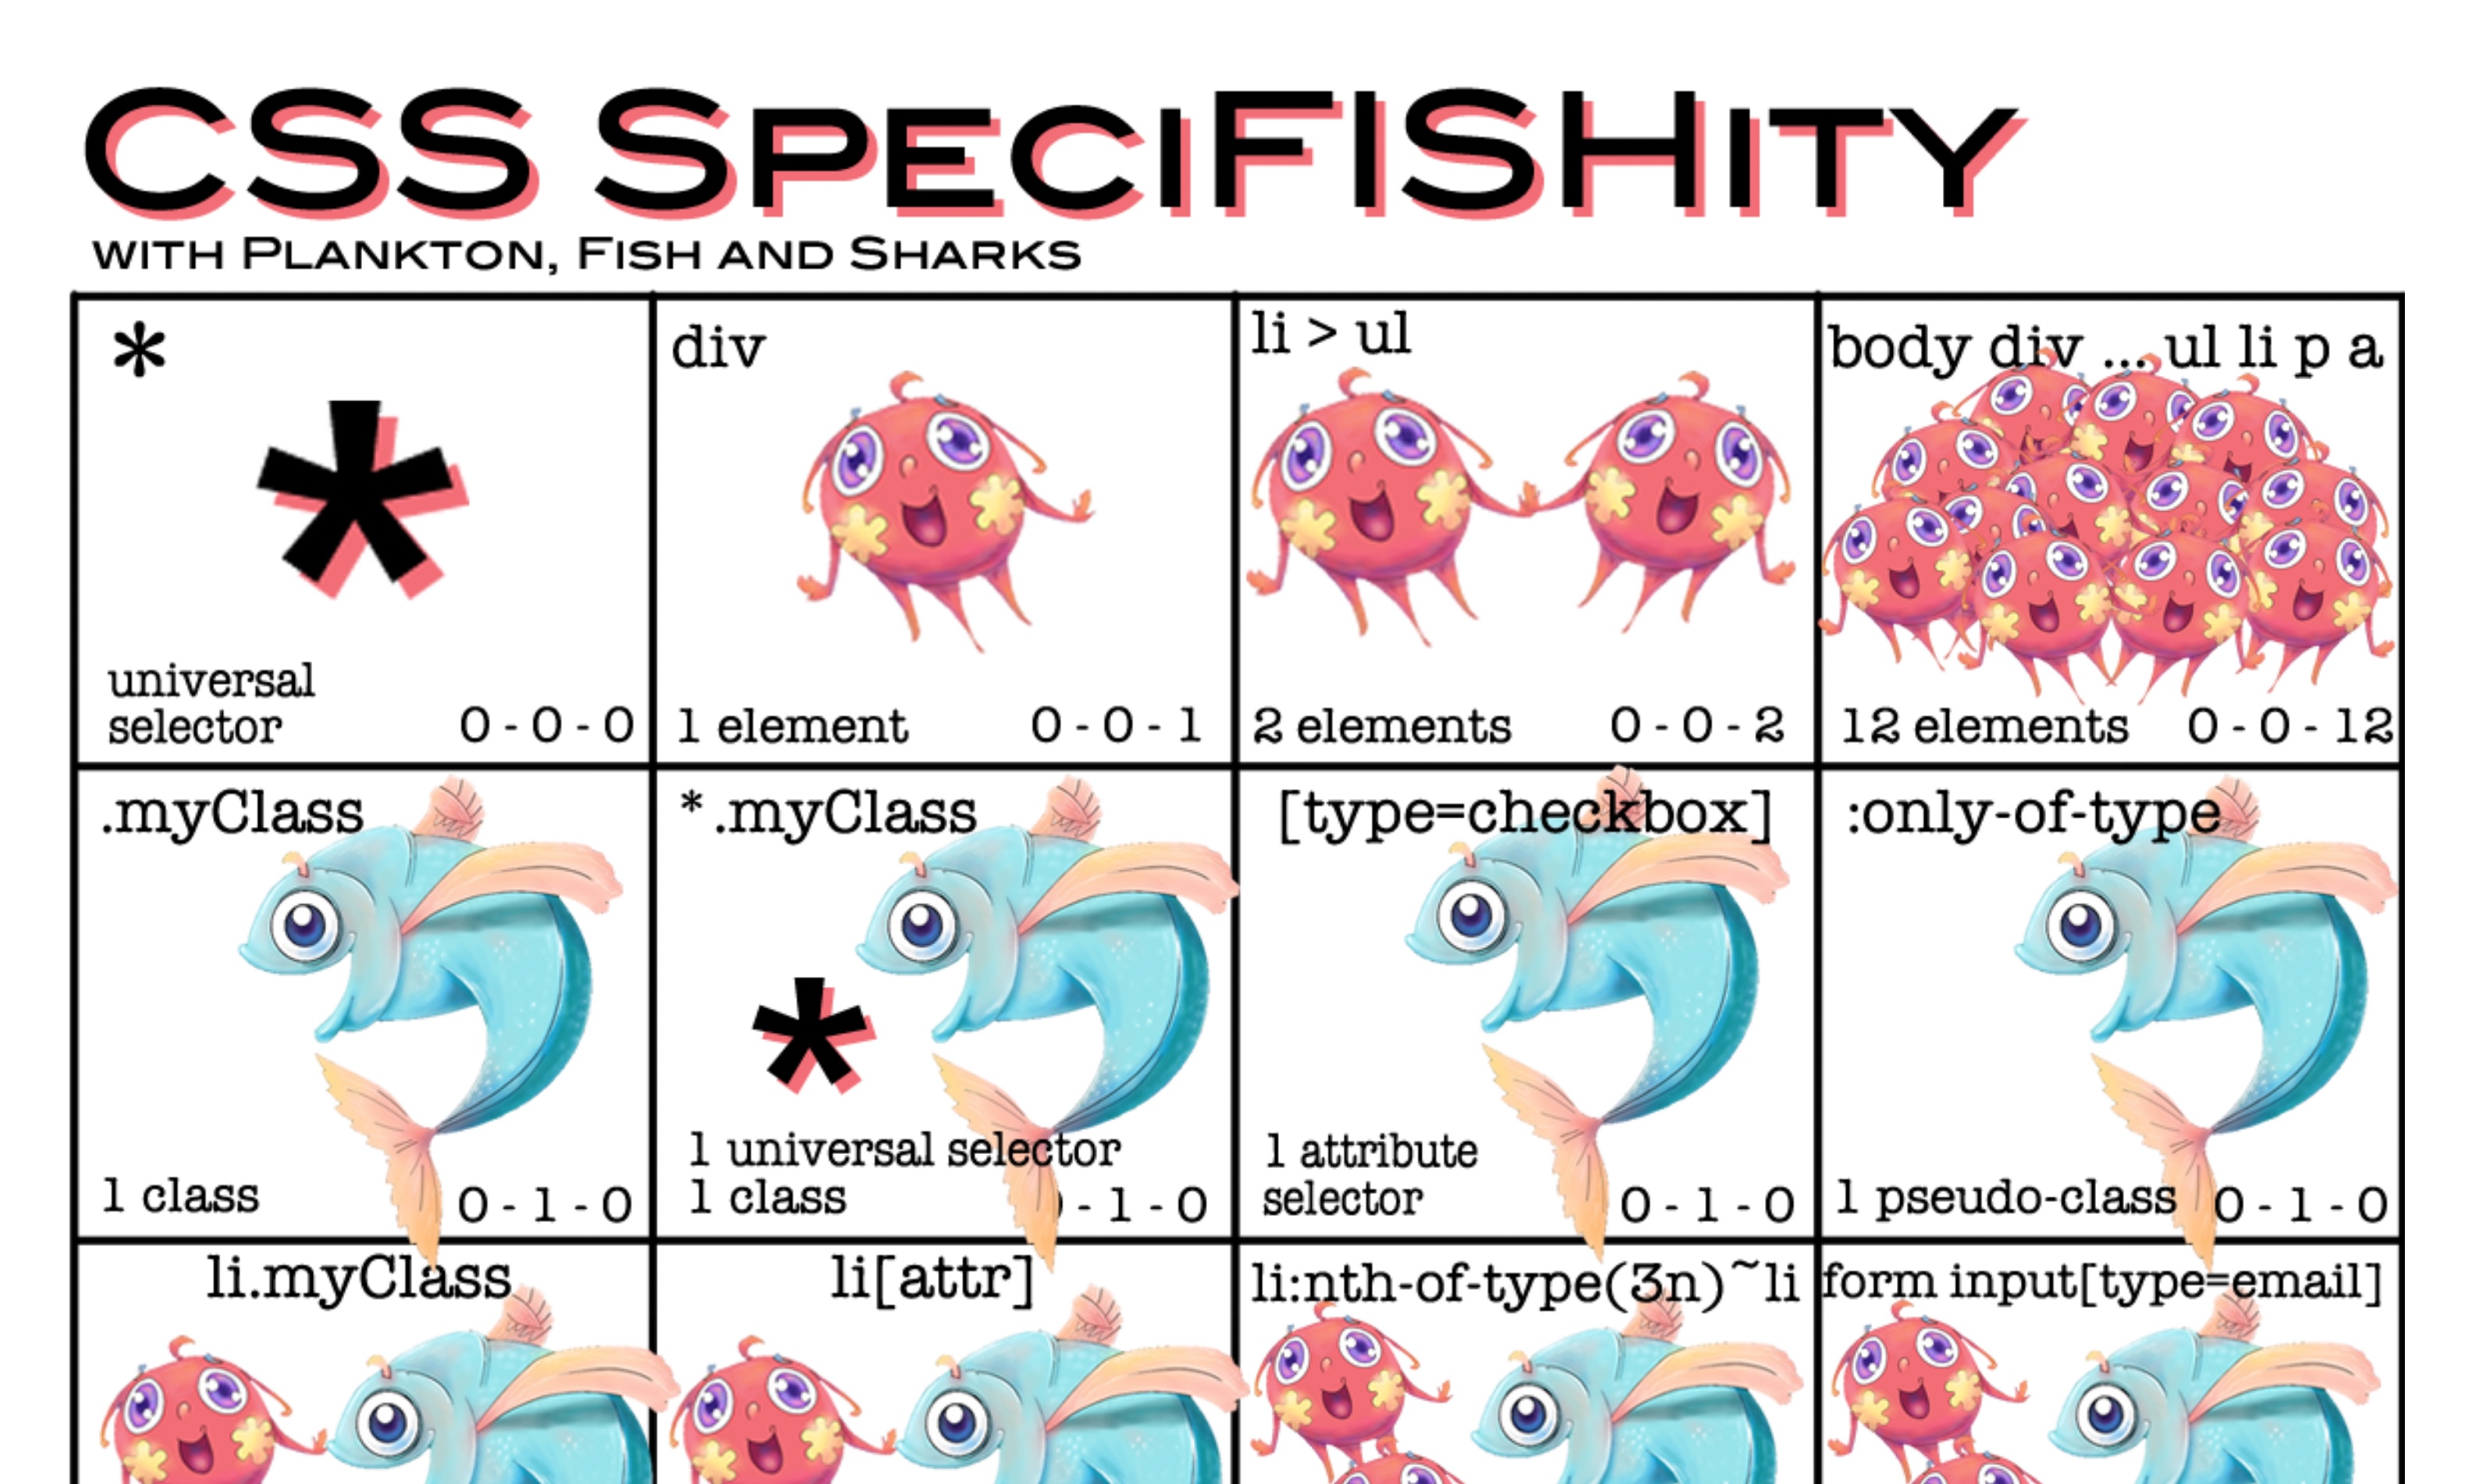 CSS SpeciFISHity,
A table of different fish
in different combinations,
each one labeled as a type of selector,
and their specificities calculated below.
